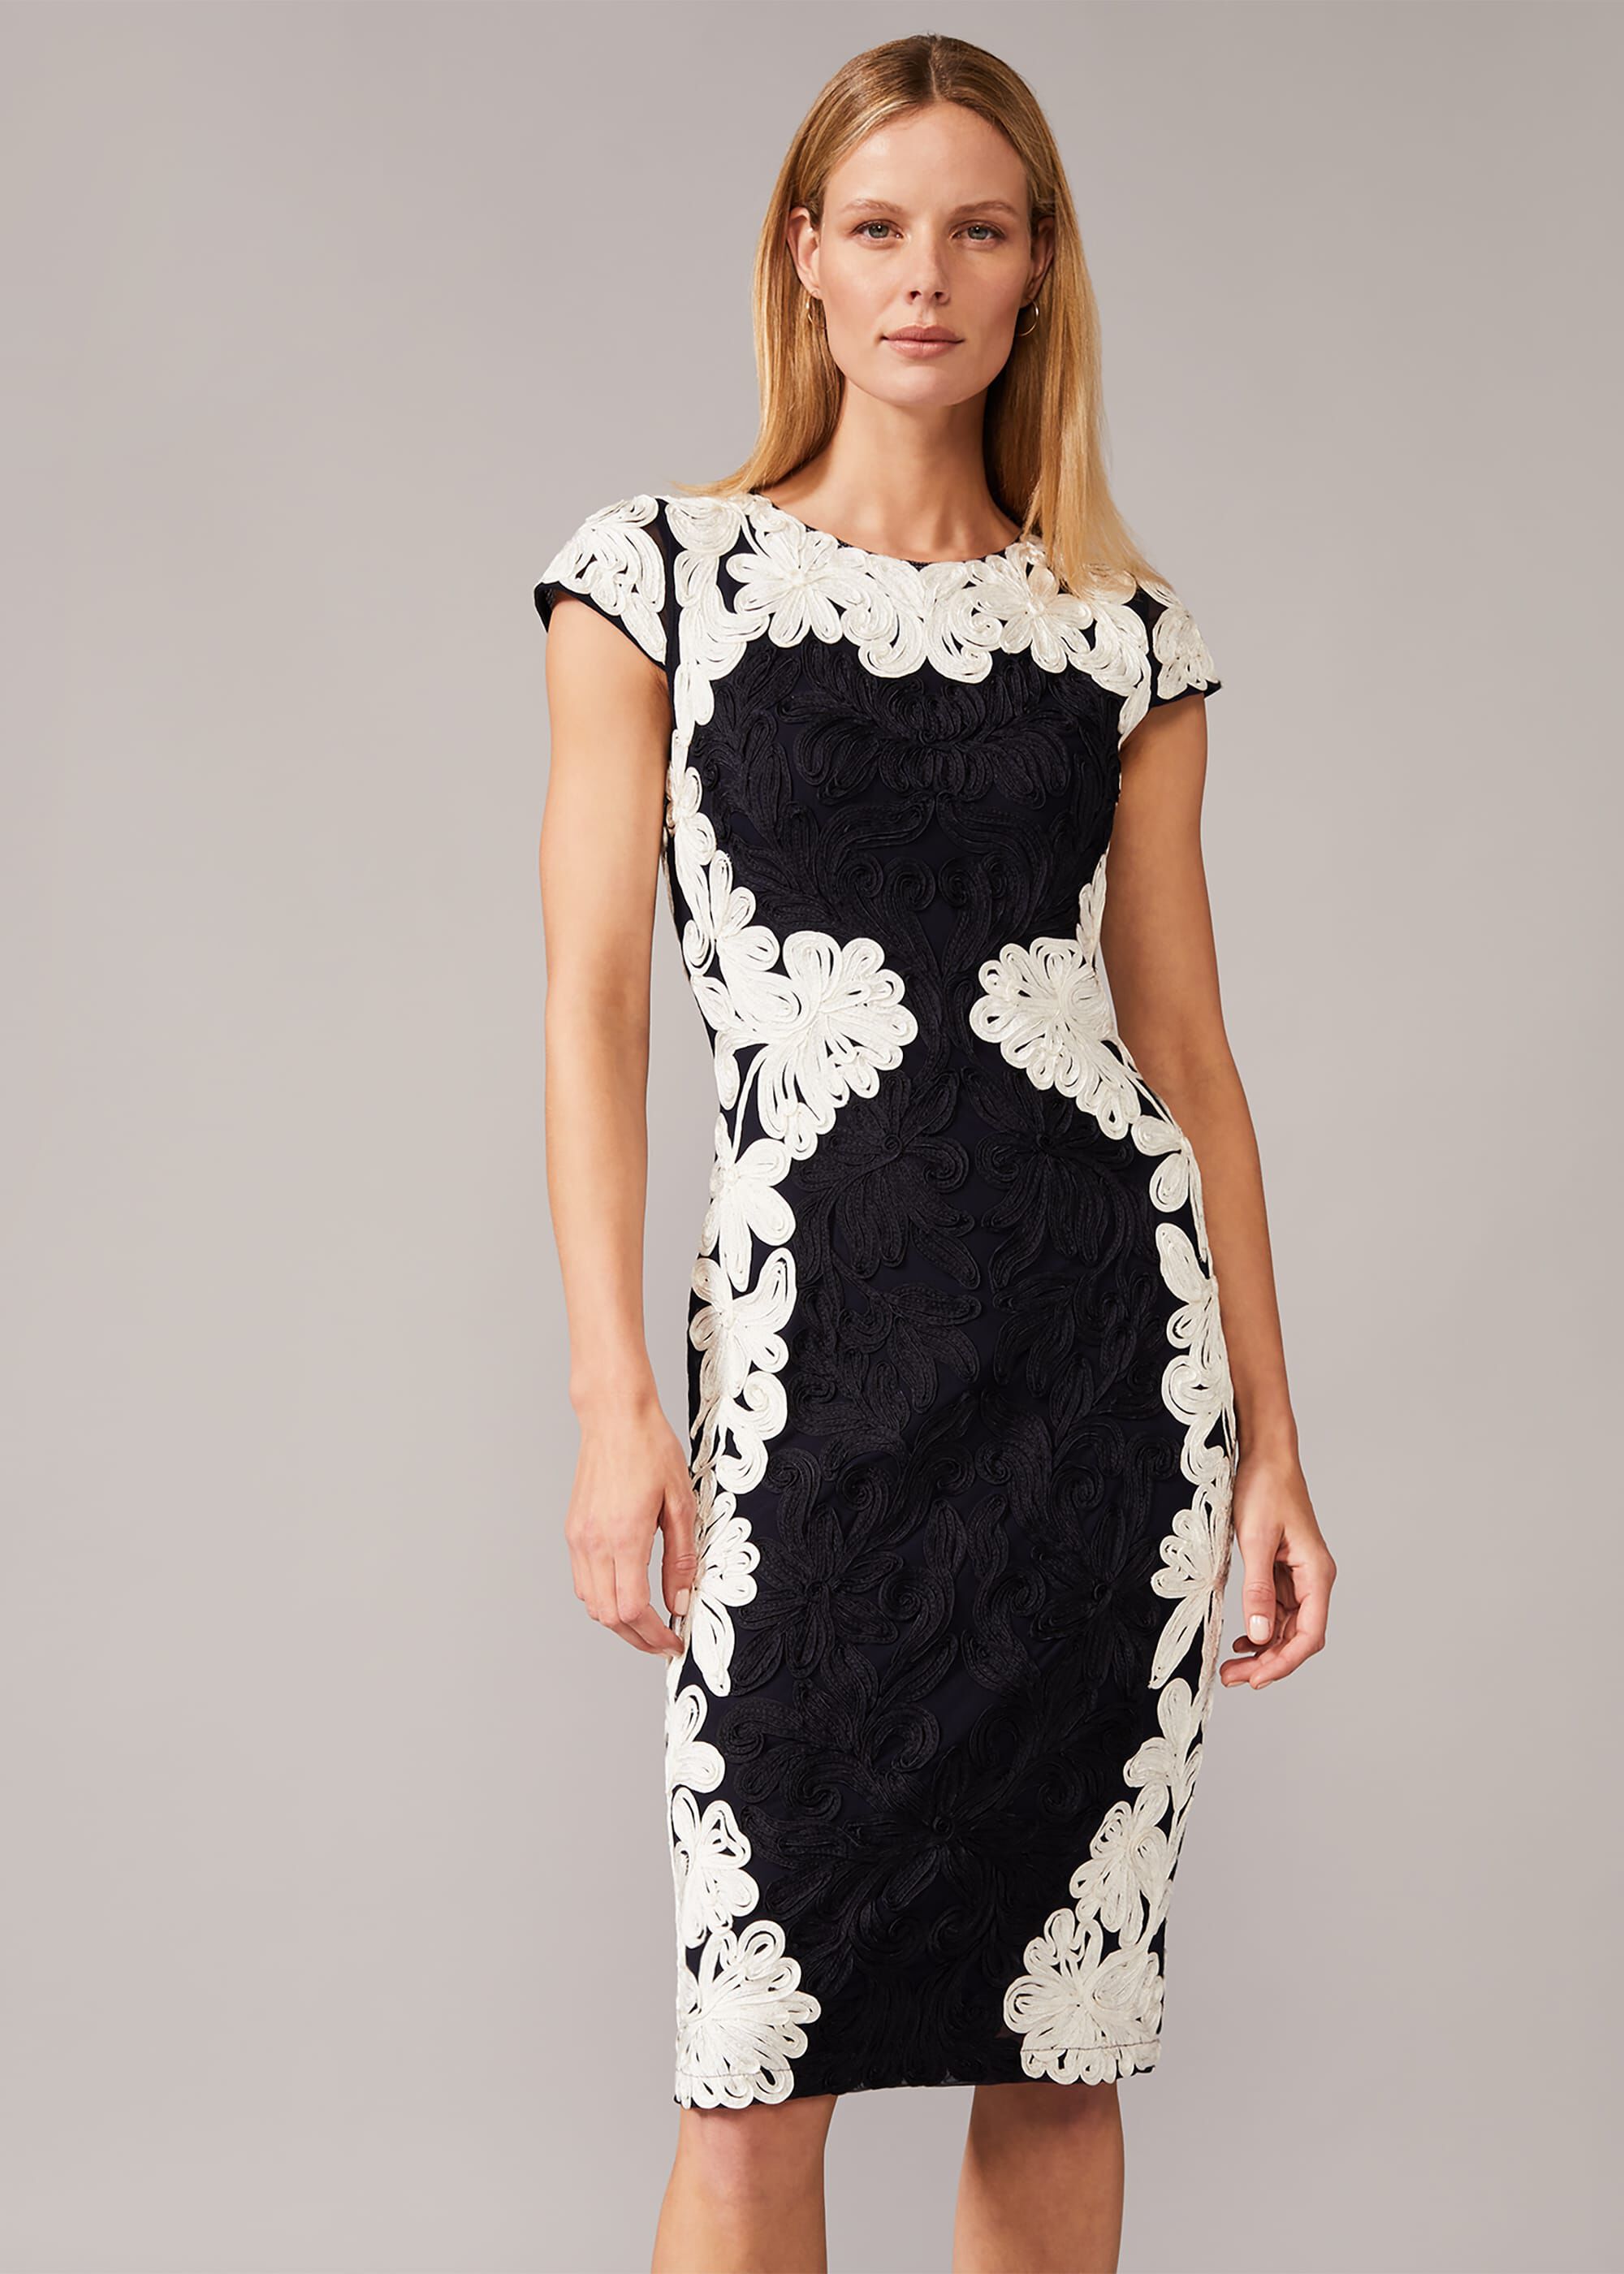 phase eight navy lace dress